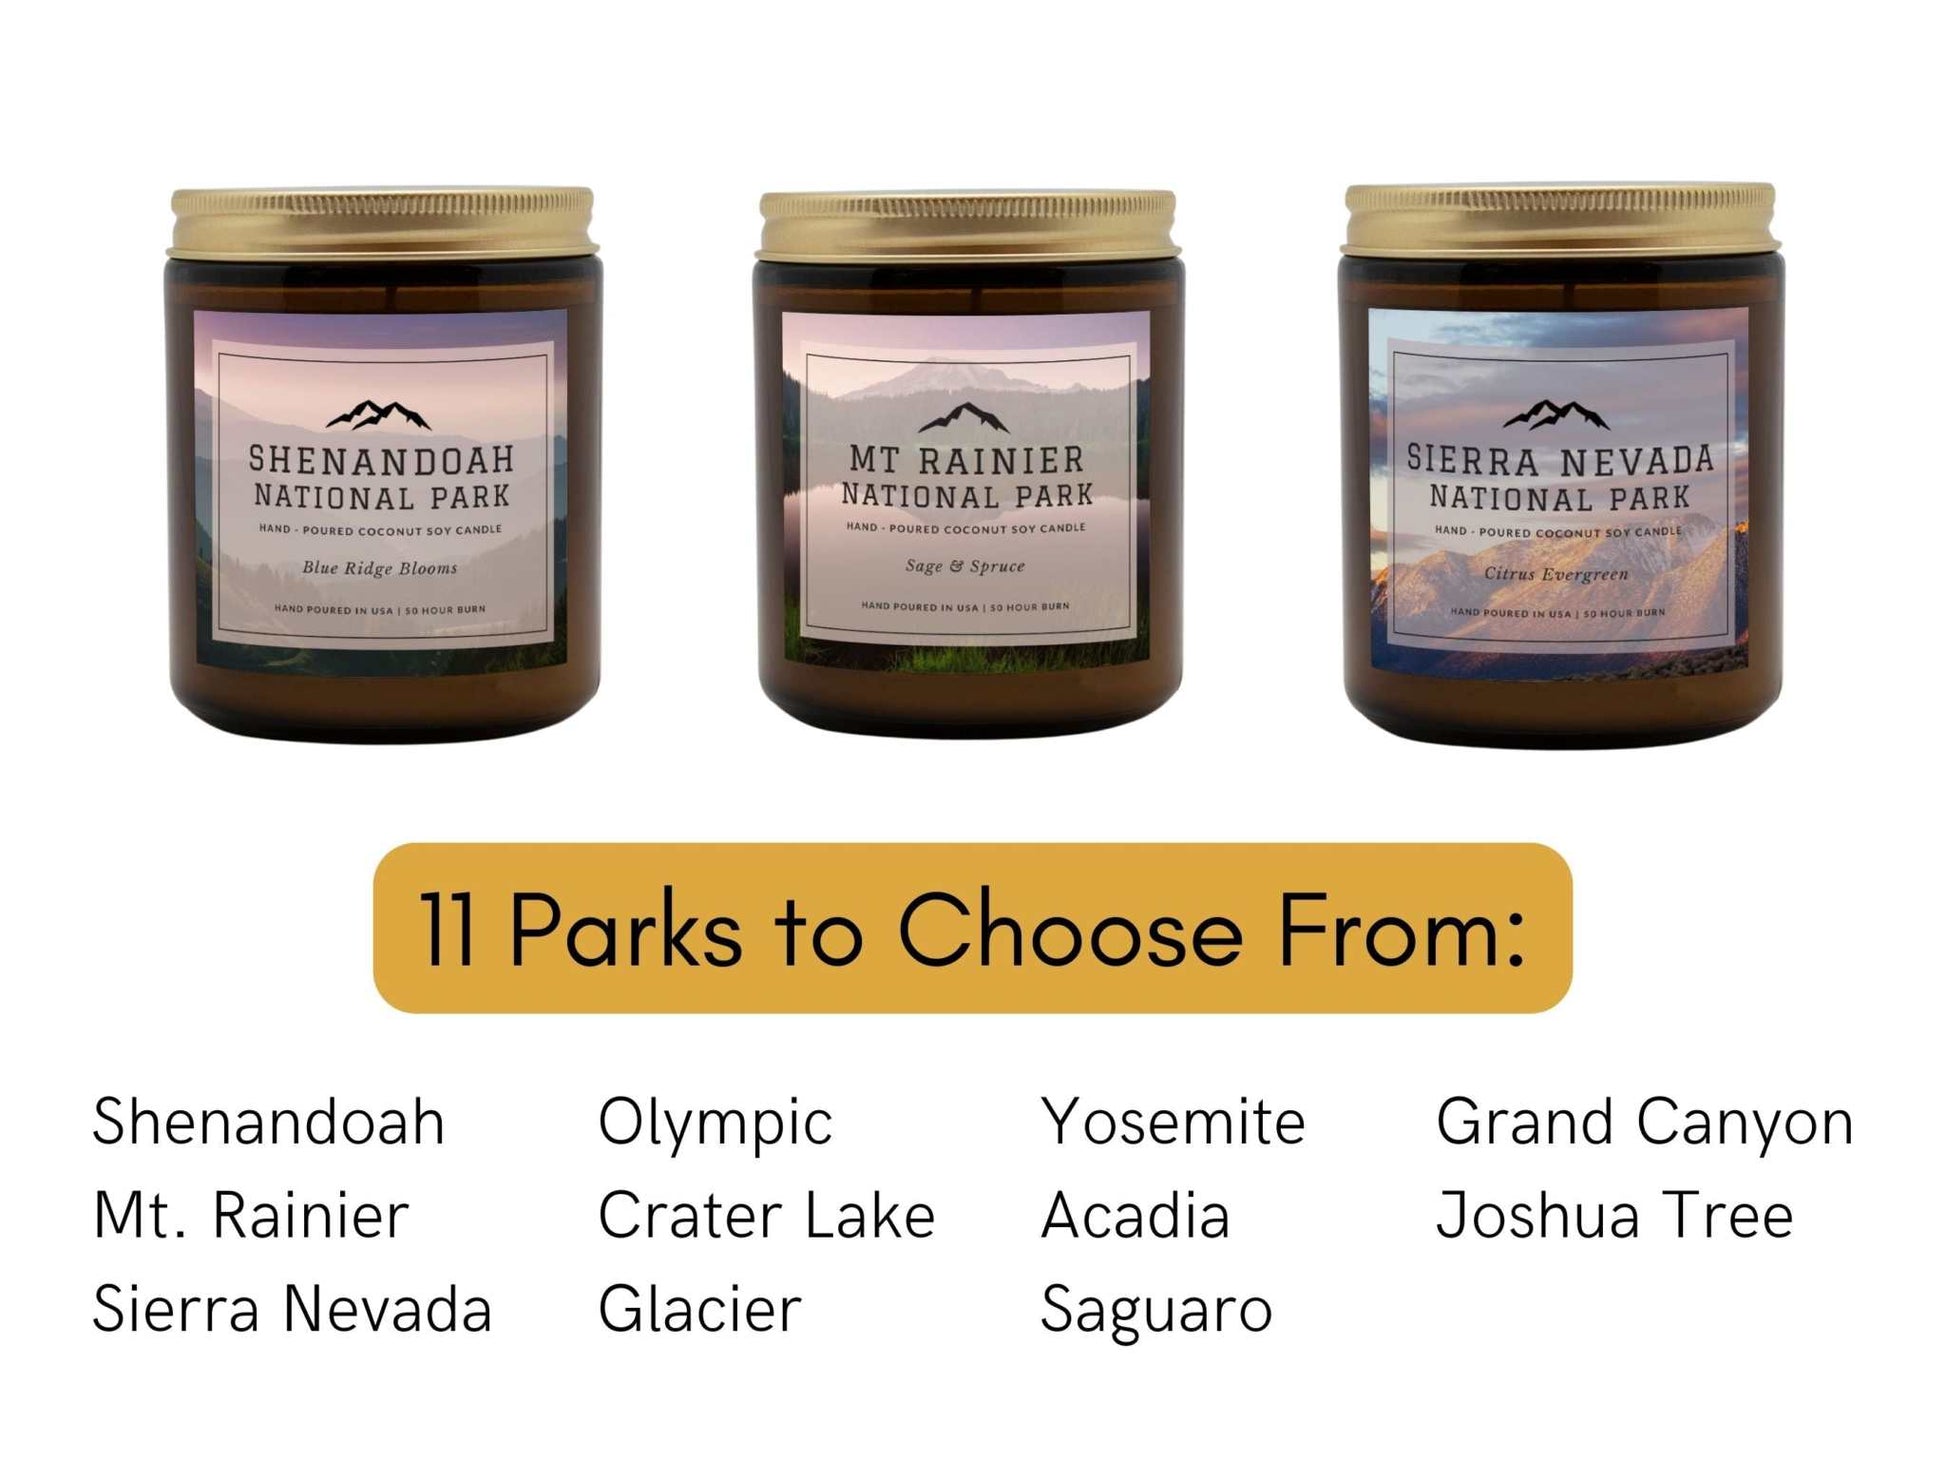 Olympic National Park Sage Beachwood CandleBring home the smell of the most beautiful places on earth, with these 9 oz coconut soy wax hand-poured National Park candles. These National Park Amber Jar Candles 